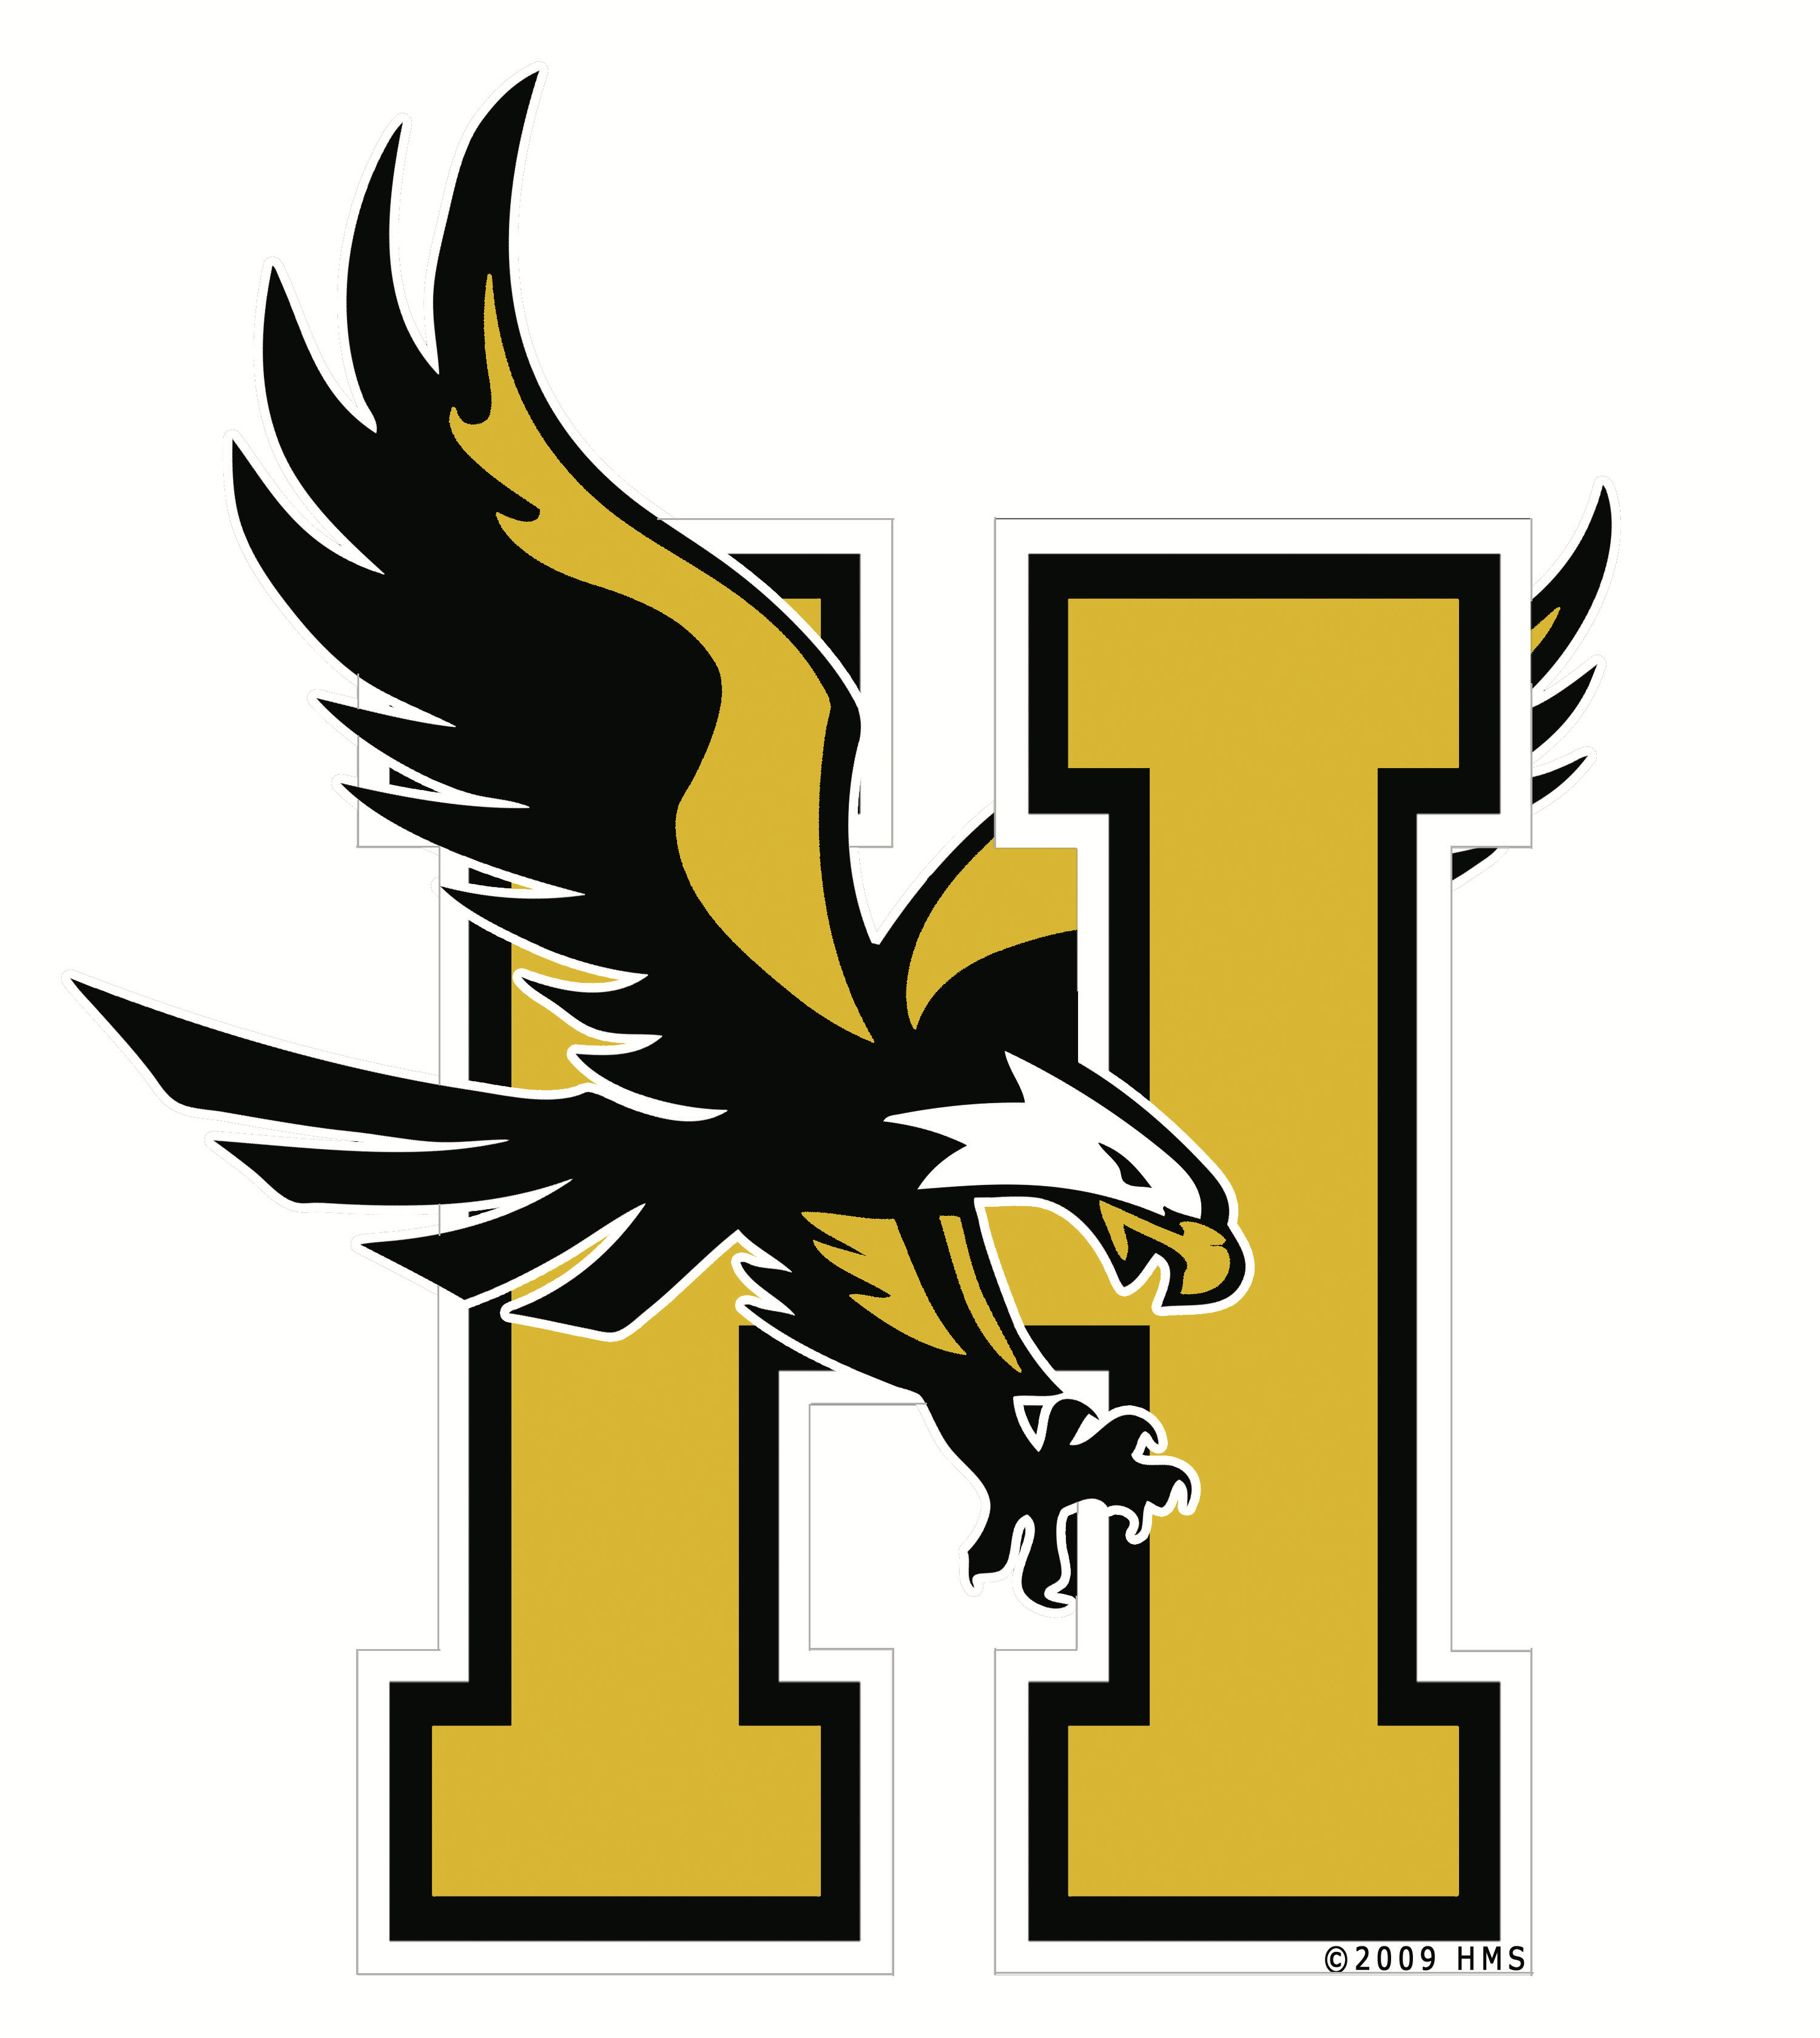 Column Hobbs High lays out plan for graduation Saturday, July 18